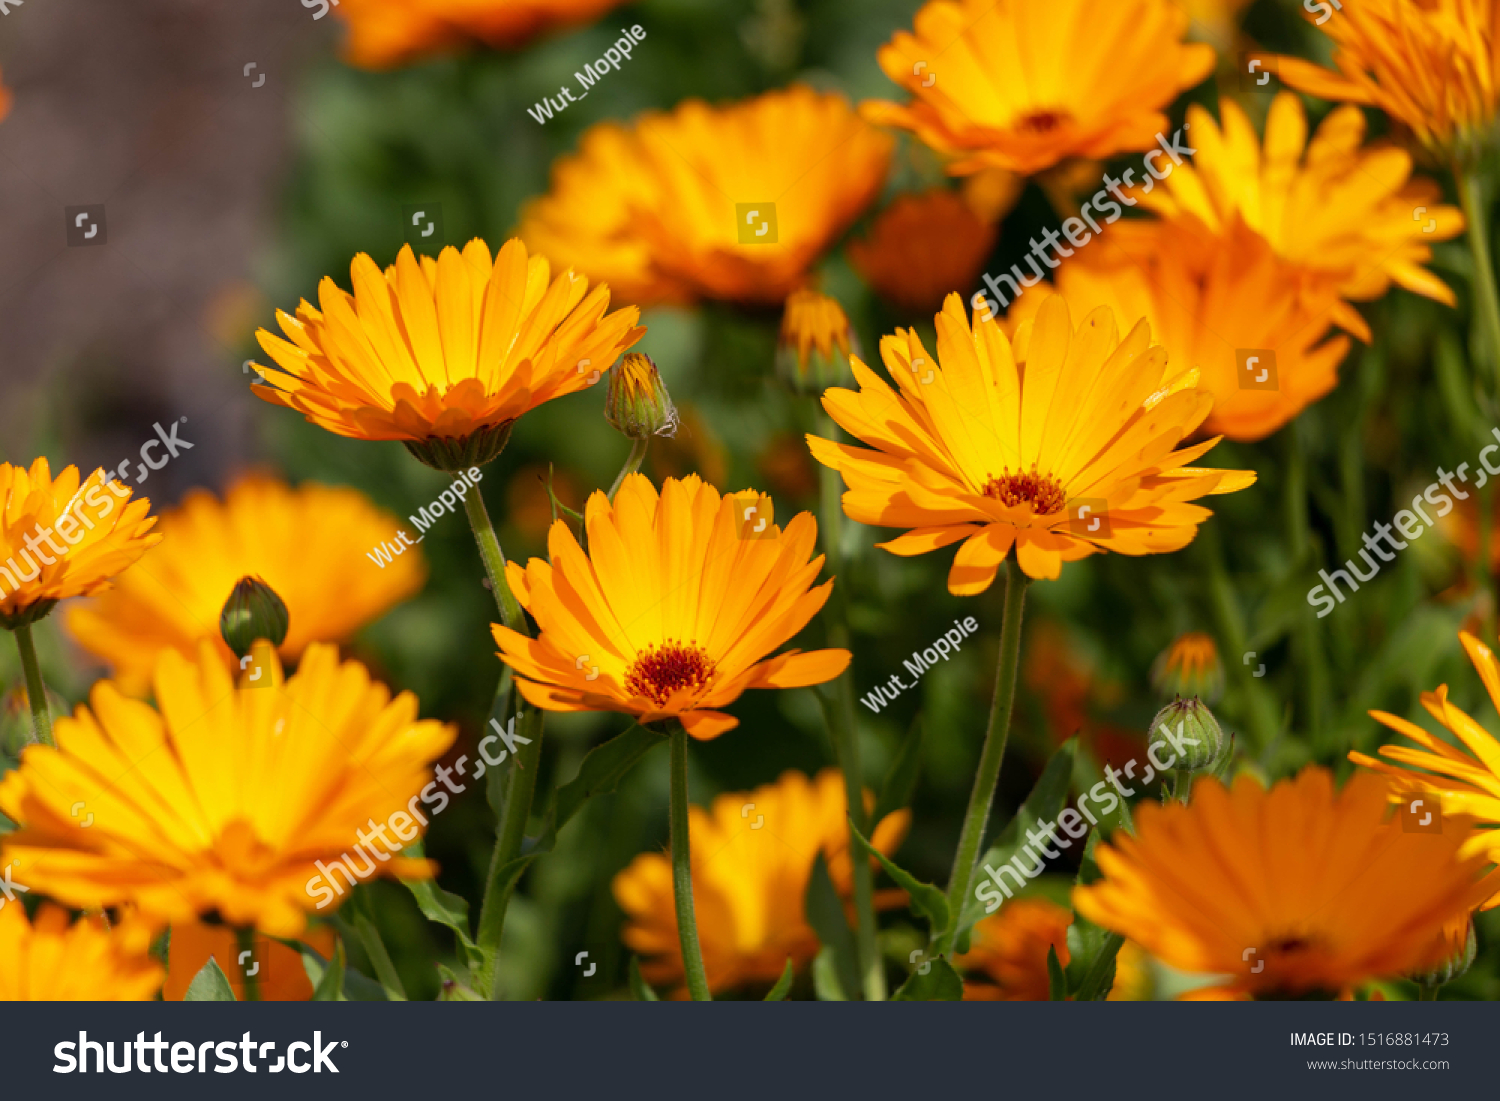 Selective focus of orange Calendula officinalis flower in garden, Pot Marigold, Ruddles, Mary's gold or Scotch marigold is a flowering plant in the daisy family Asteraceae, Nature floral background. #1516881473